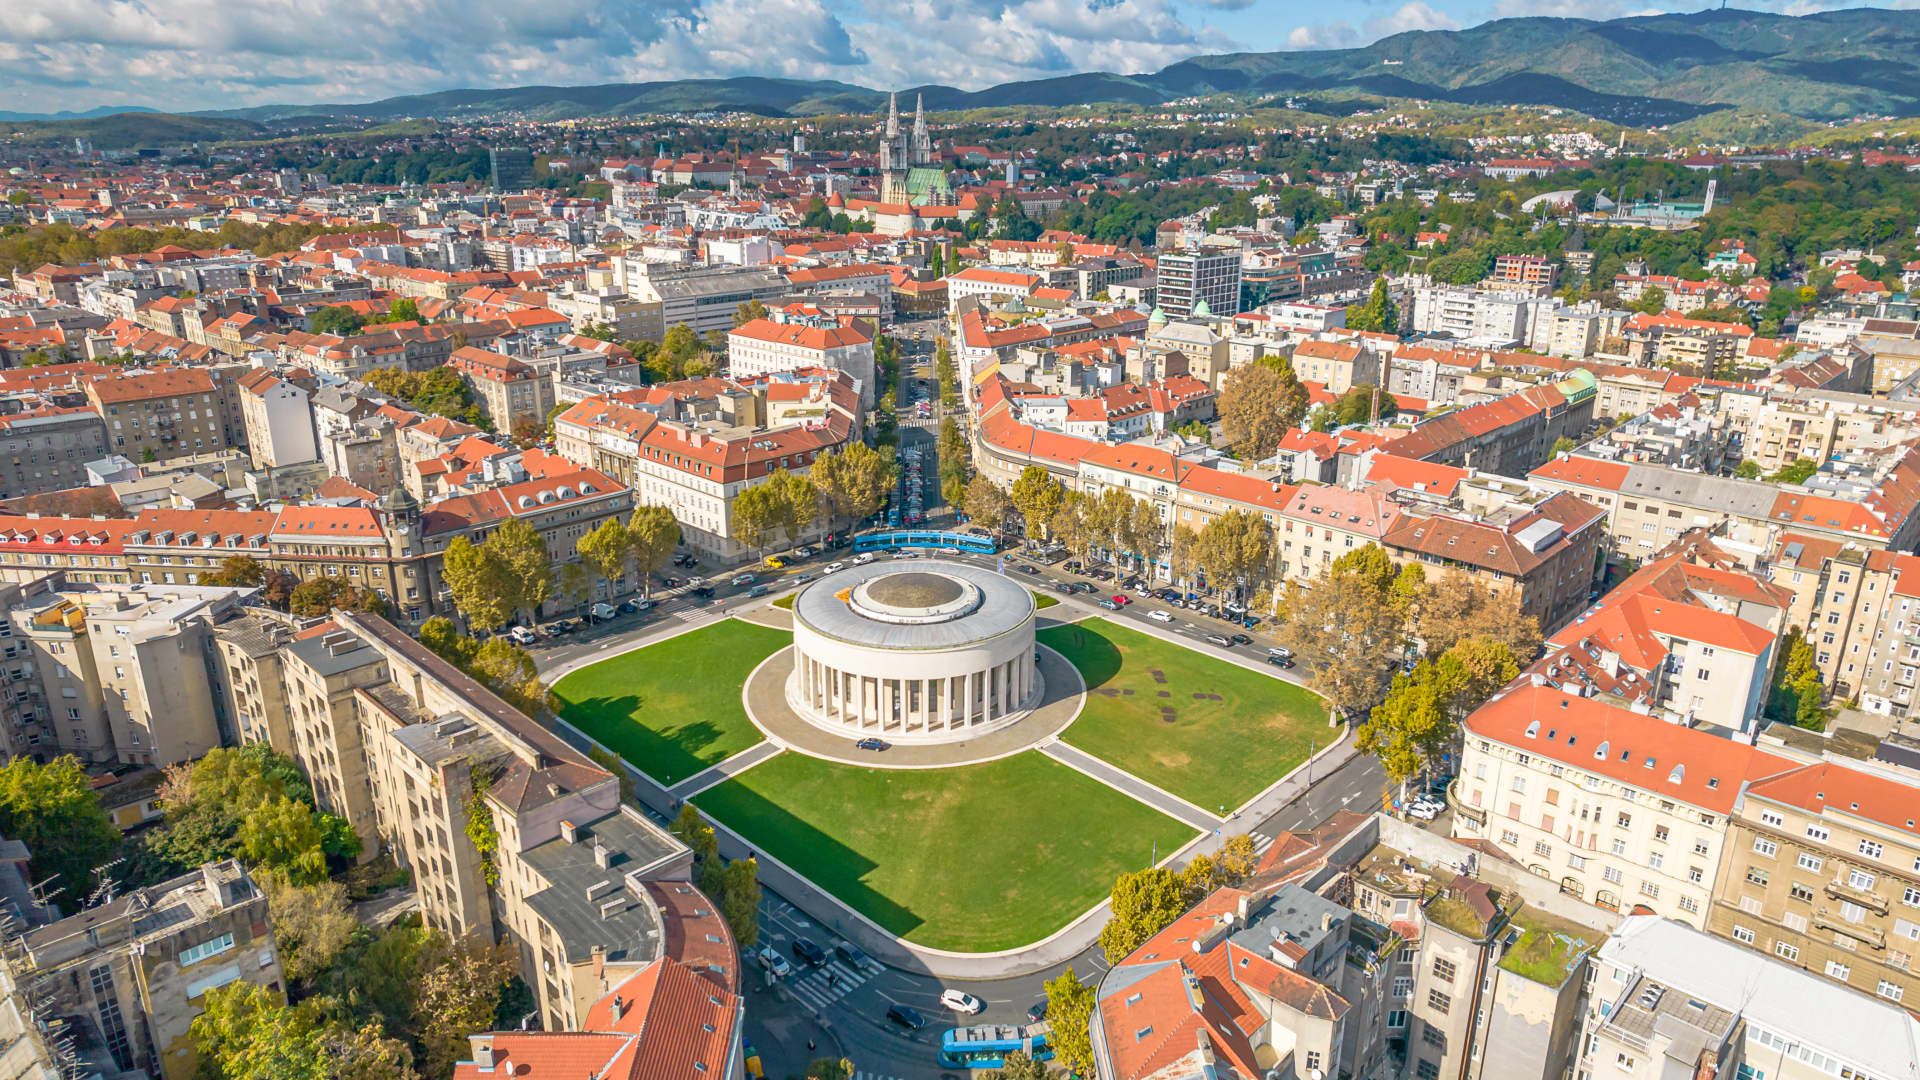 A shot of Zagreb, with the Meštrović Pavilion in the foreground and Medvednica Mountain as the backdrop.